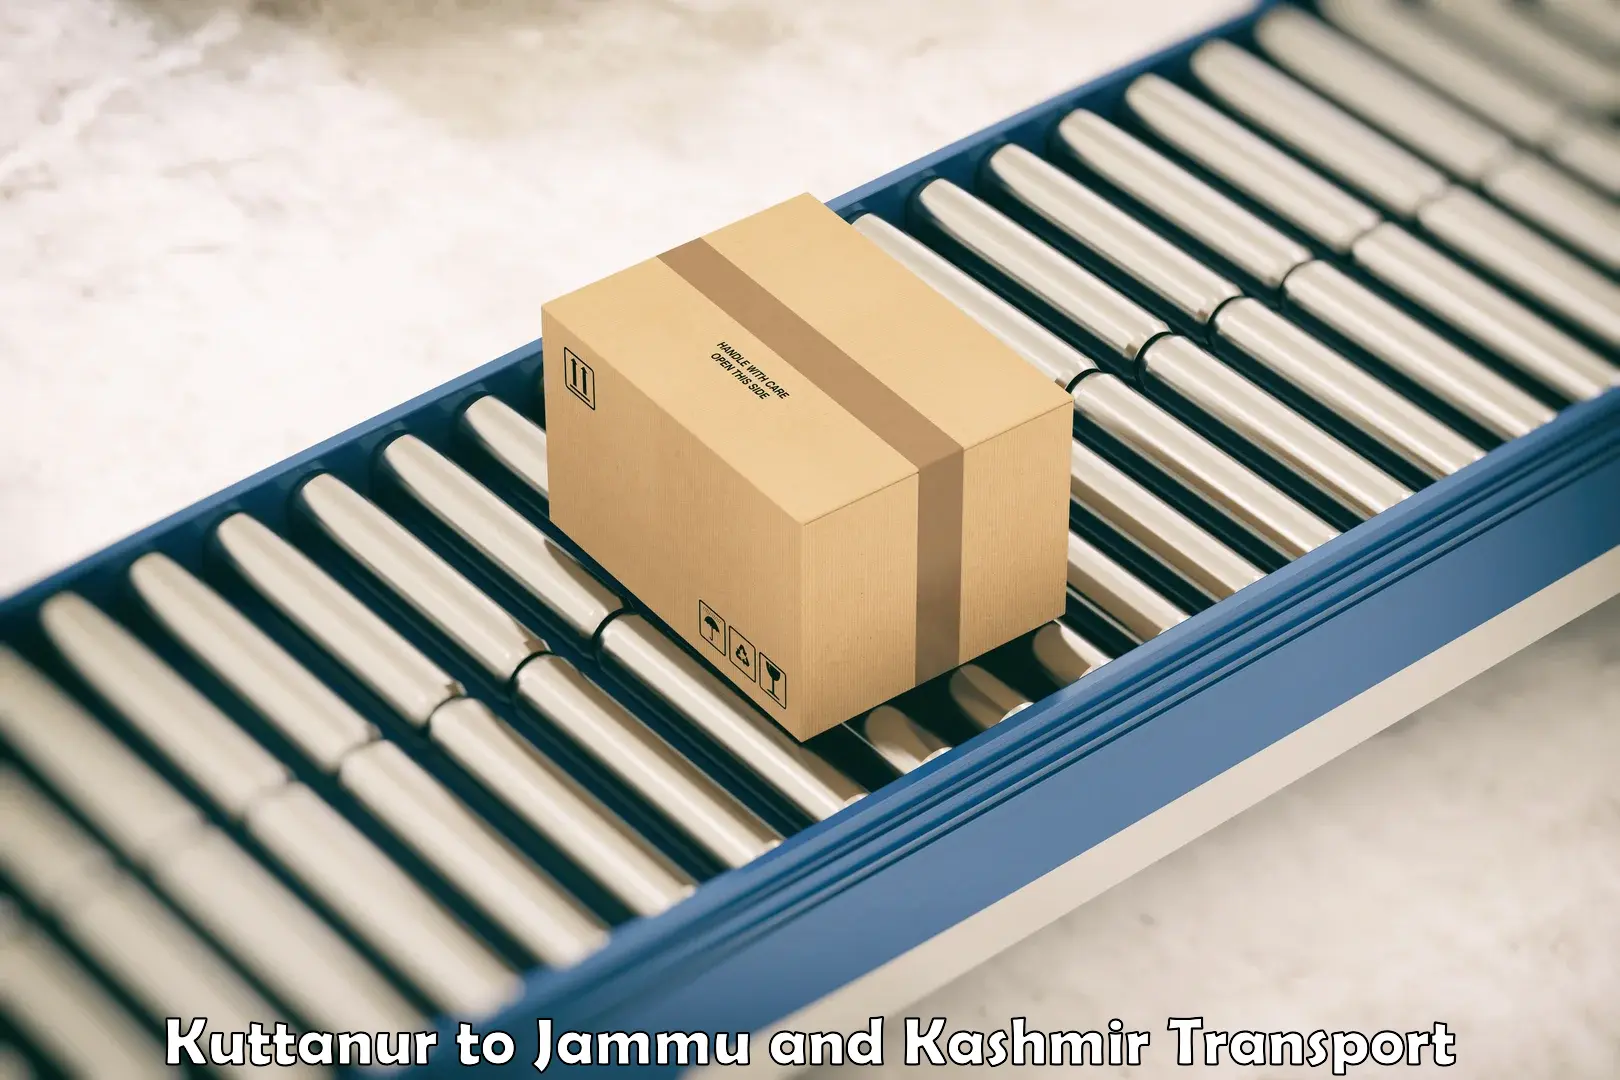 Container transport service Kuttanur to Jammu and Kashmir